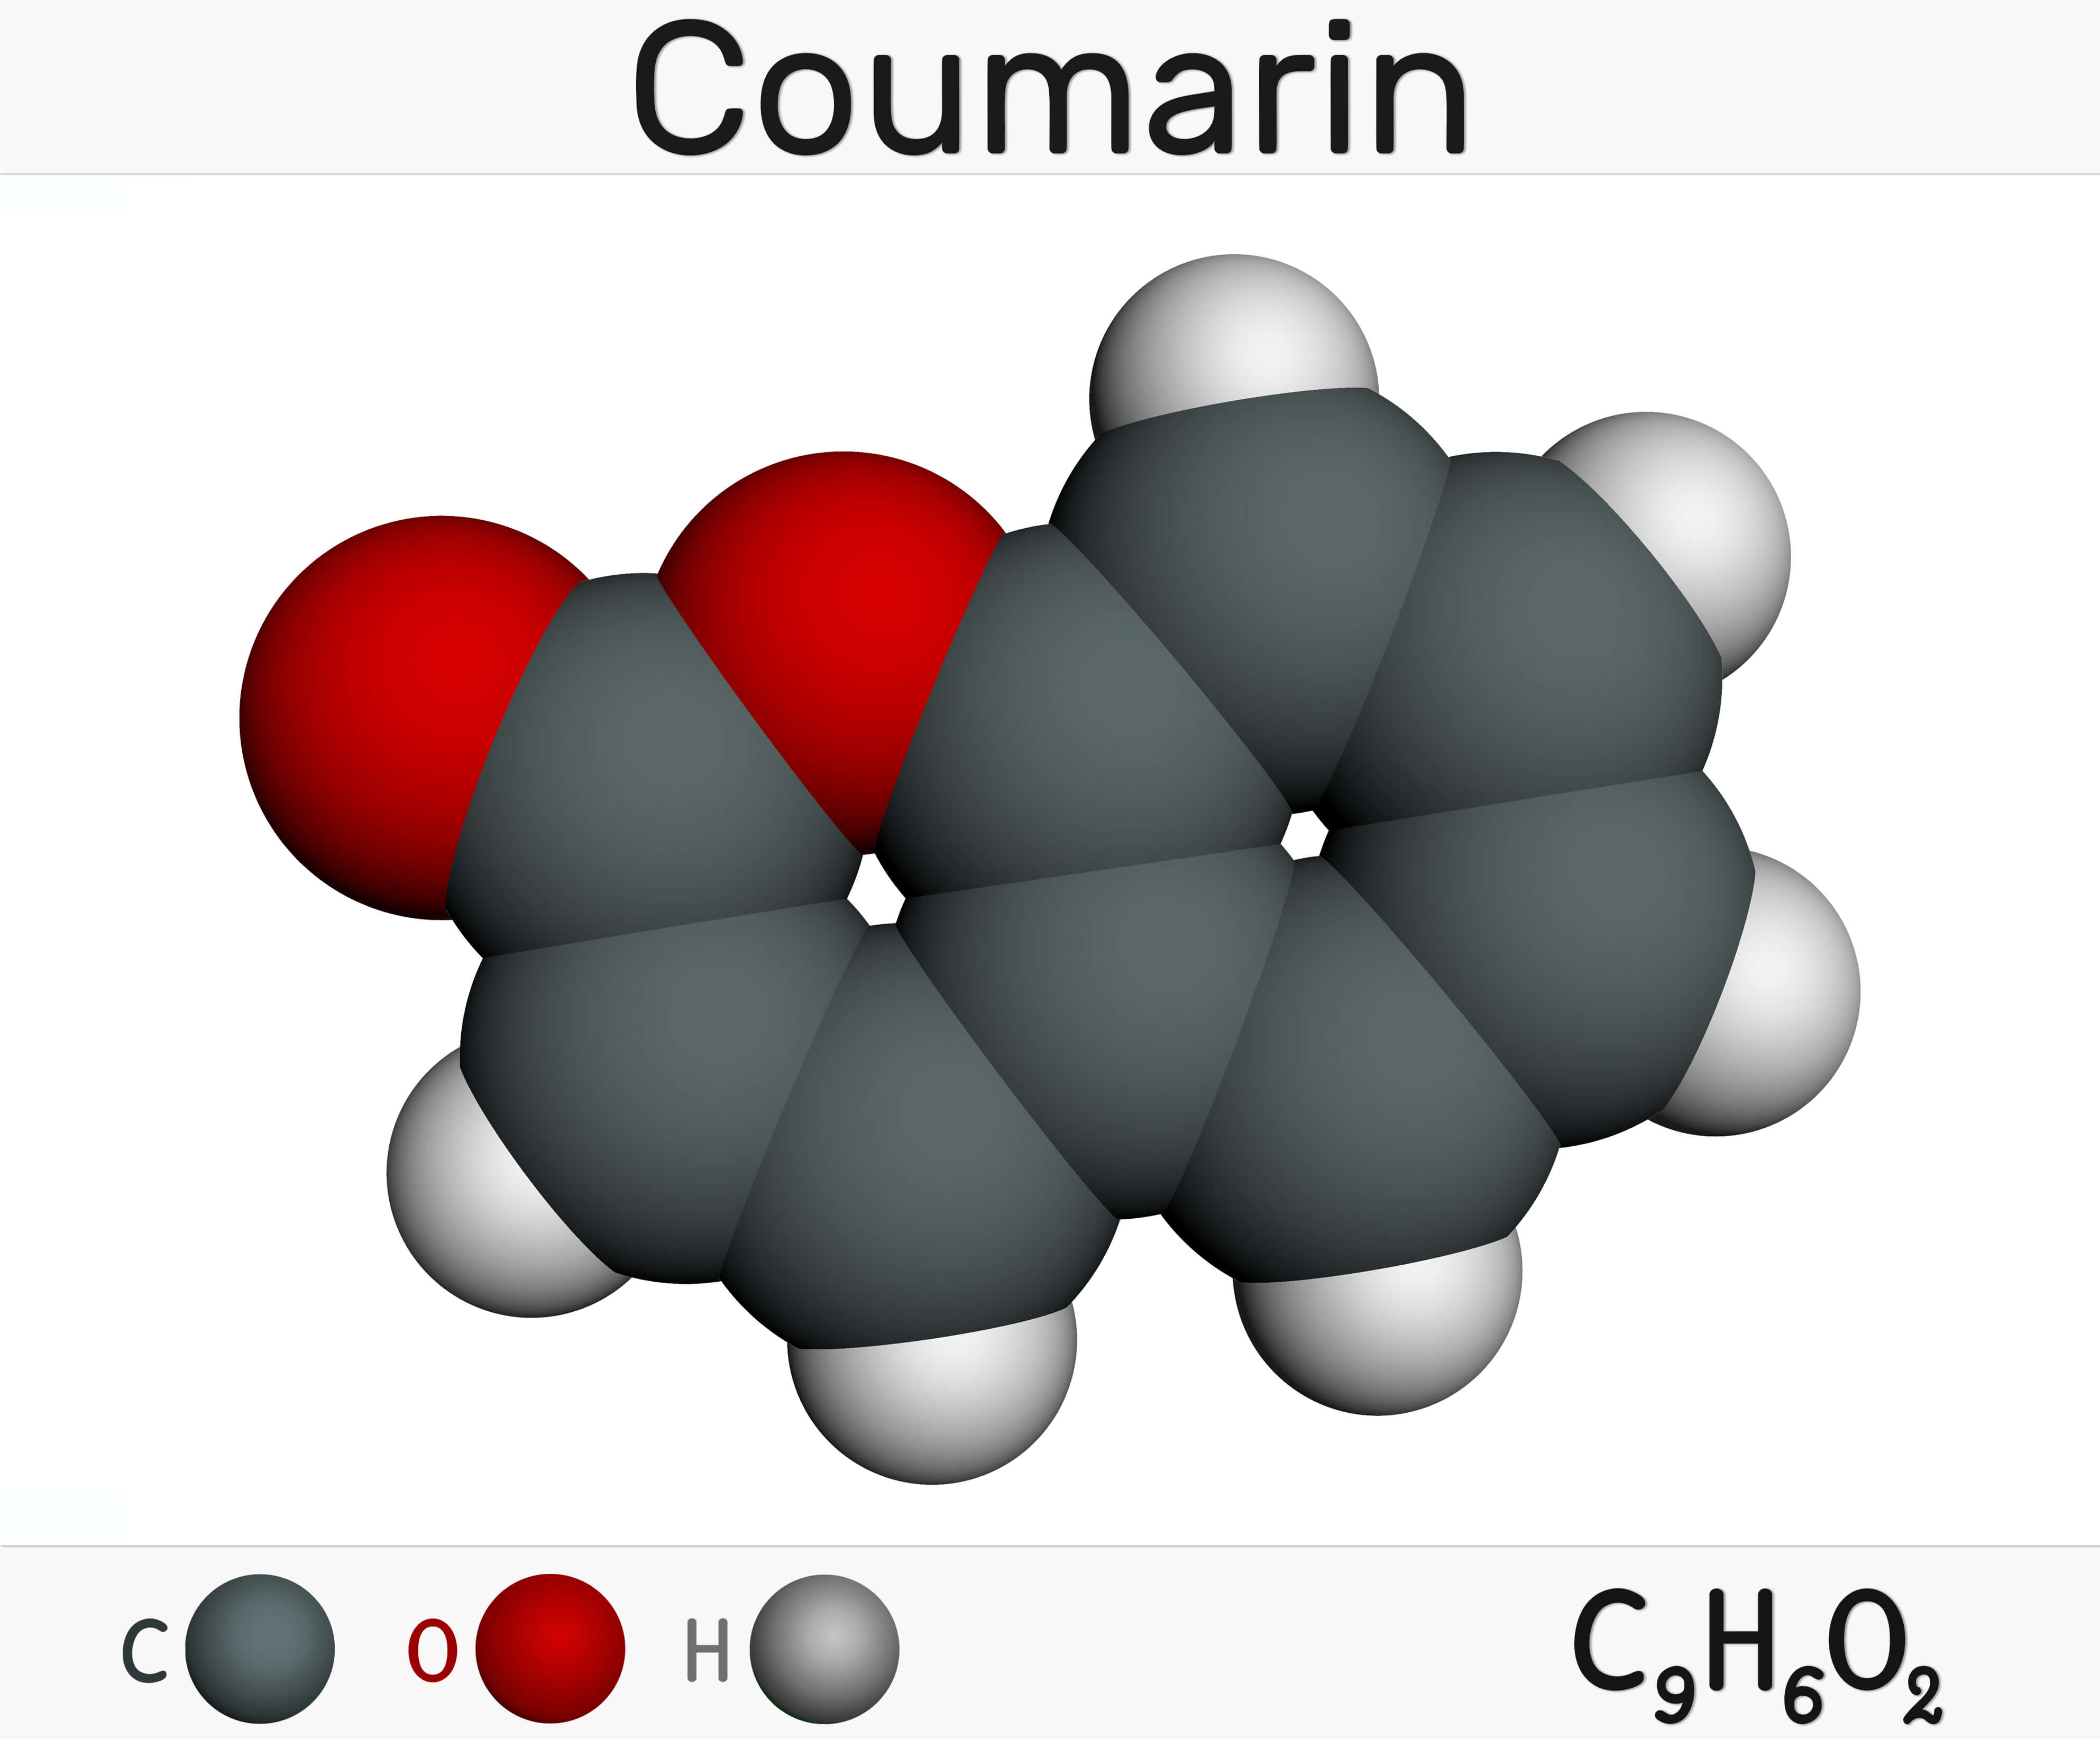 A diagram of the molecular formula of the phytochemical coumarin.